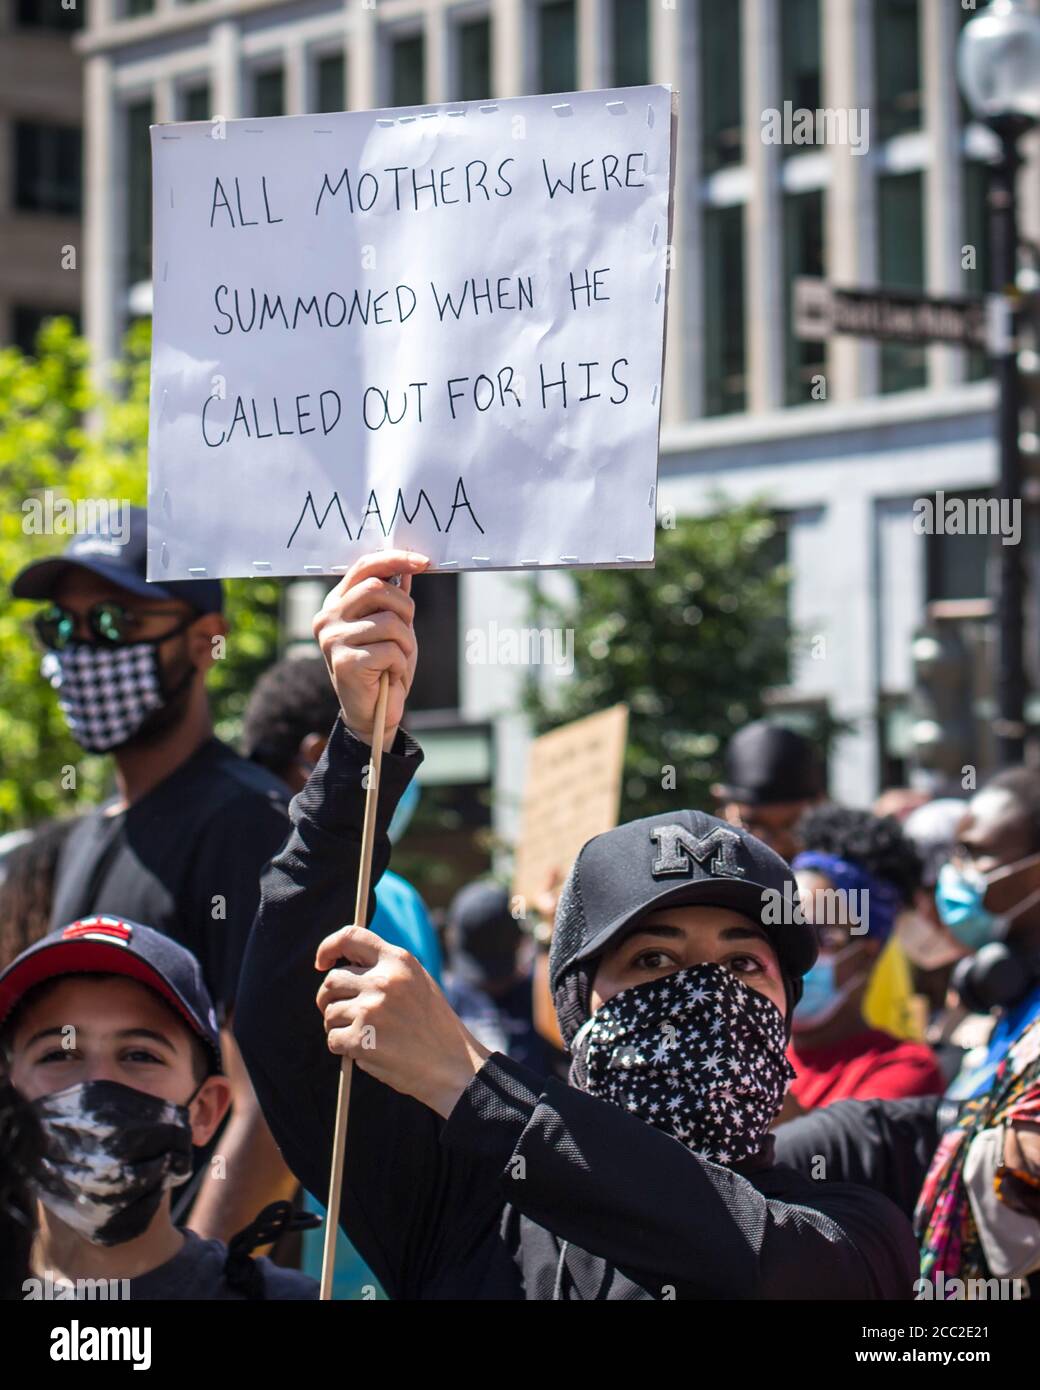 Protestors and protest signs from the Black Lives Matter protest in Washington, D.C. during June 2020 Stock Photo